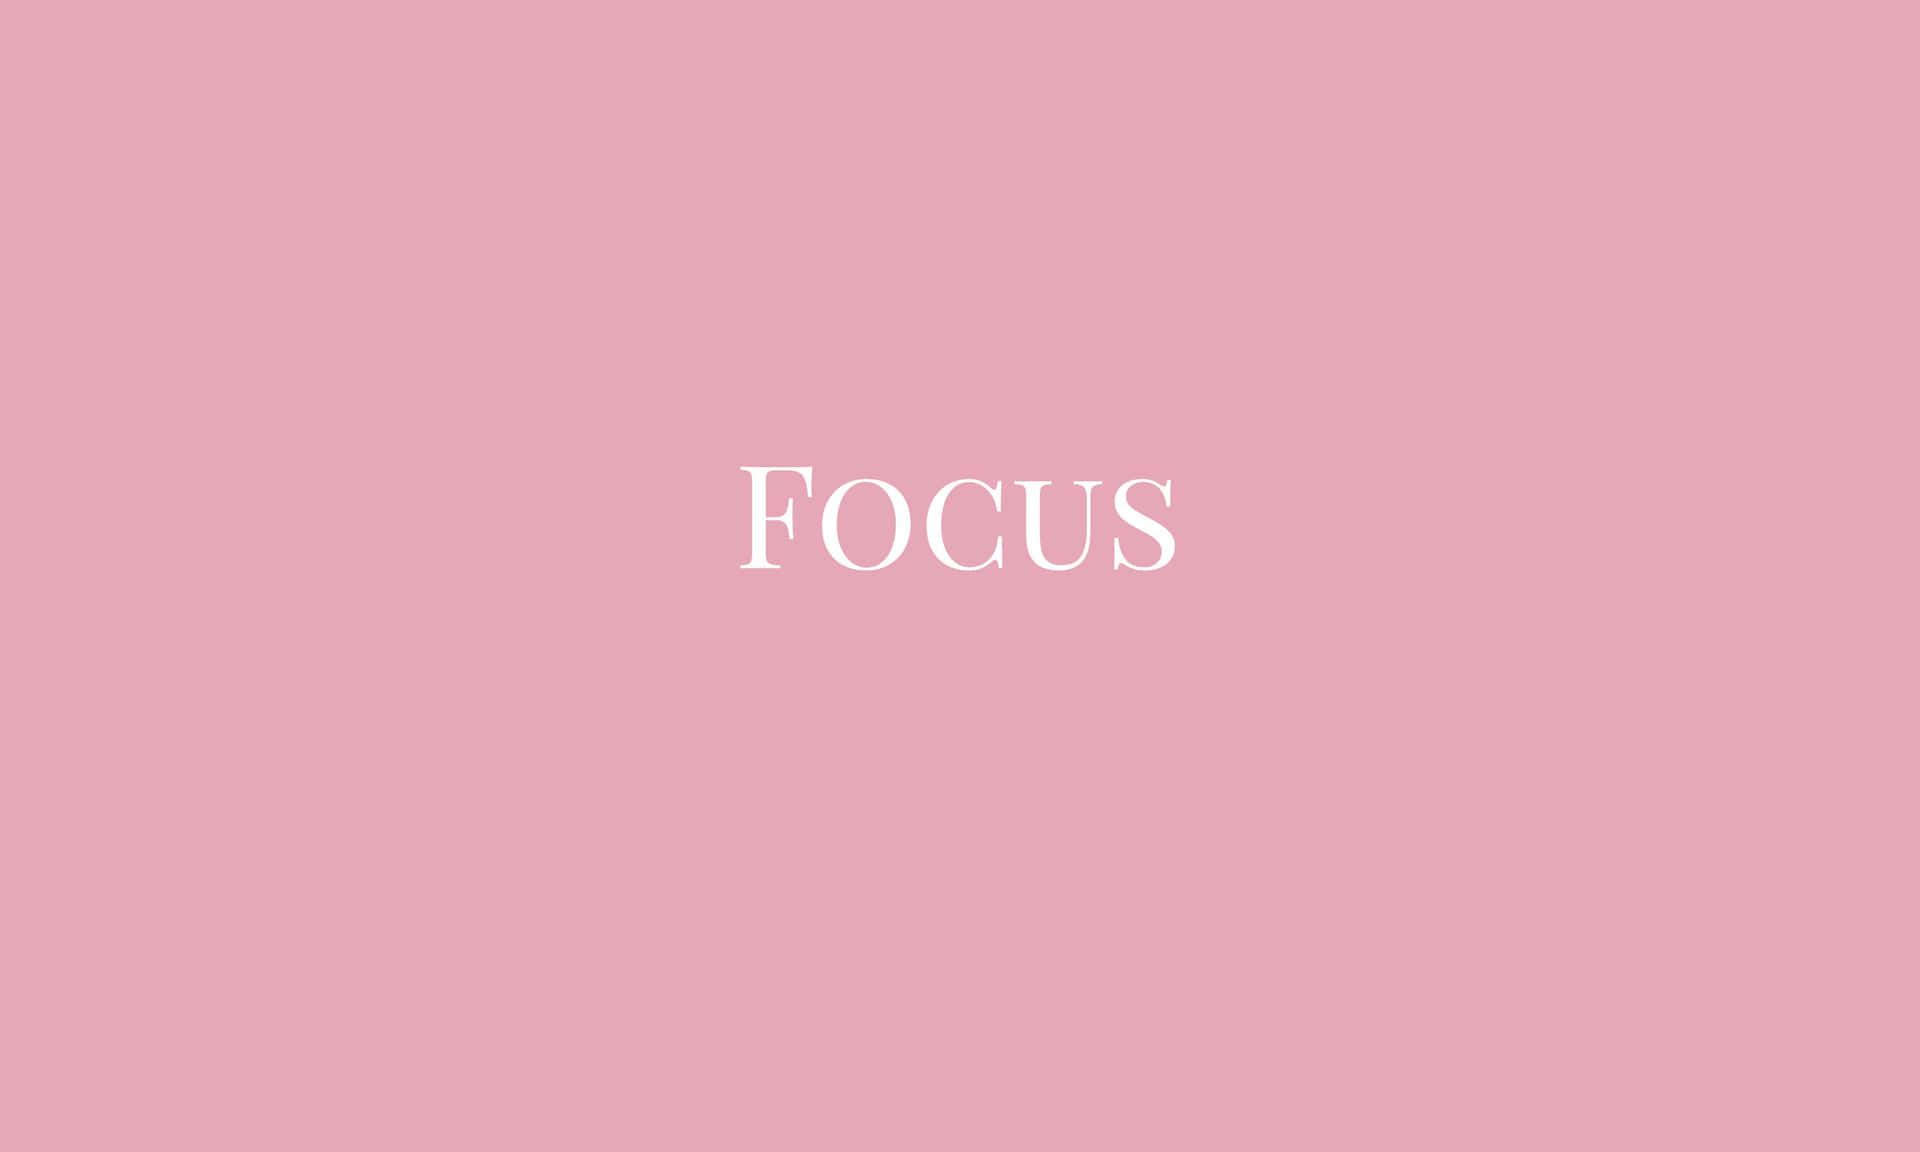 Download Focus - A Pink Background With The Word Focus Wallpaper |  Wallpapers.com